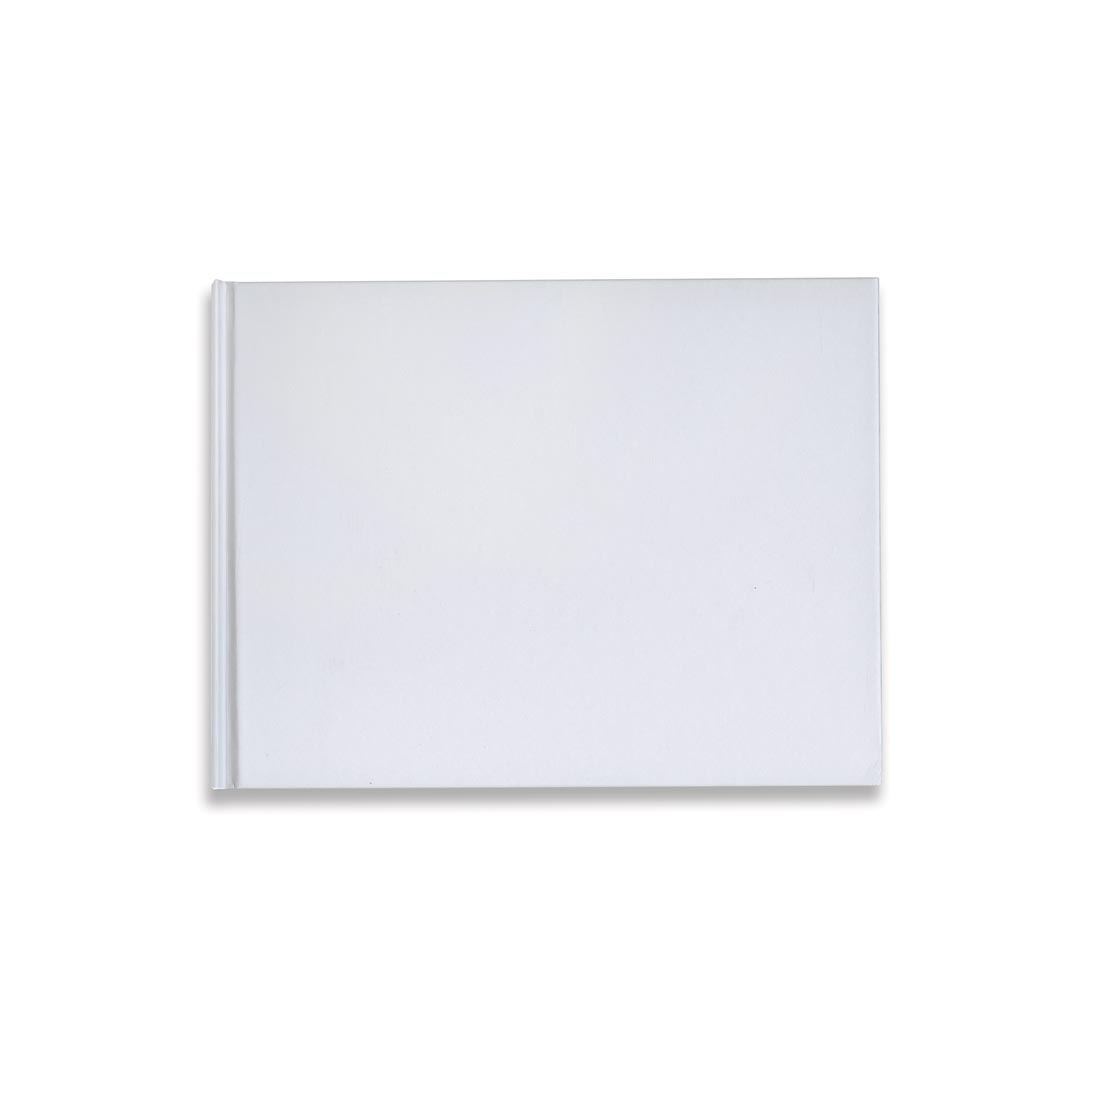 White Hardcover Blank Book Landscape Style